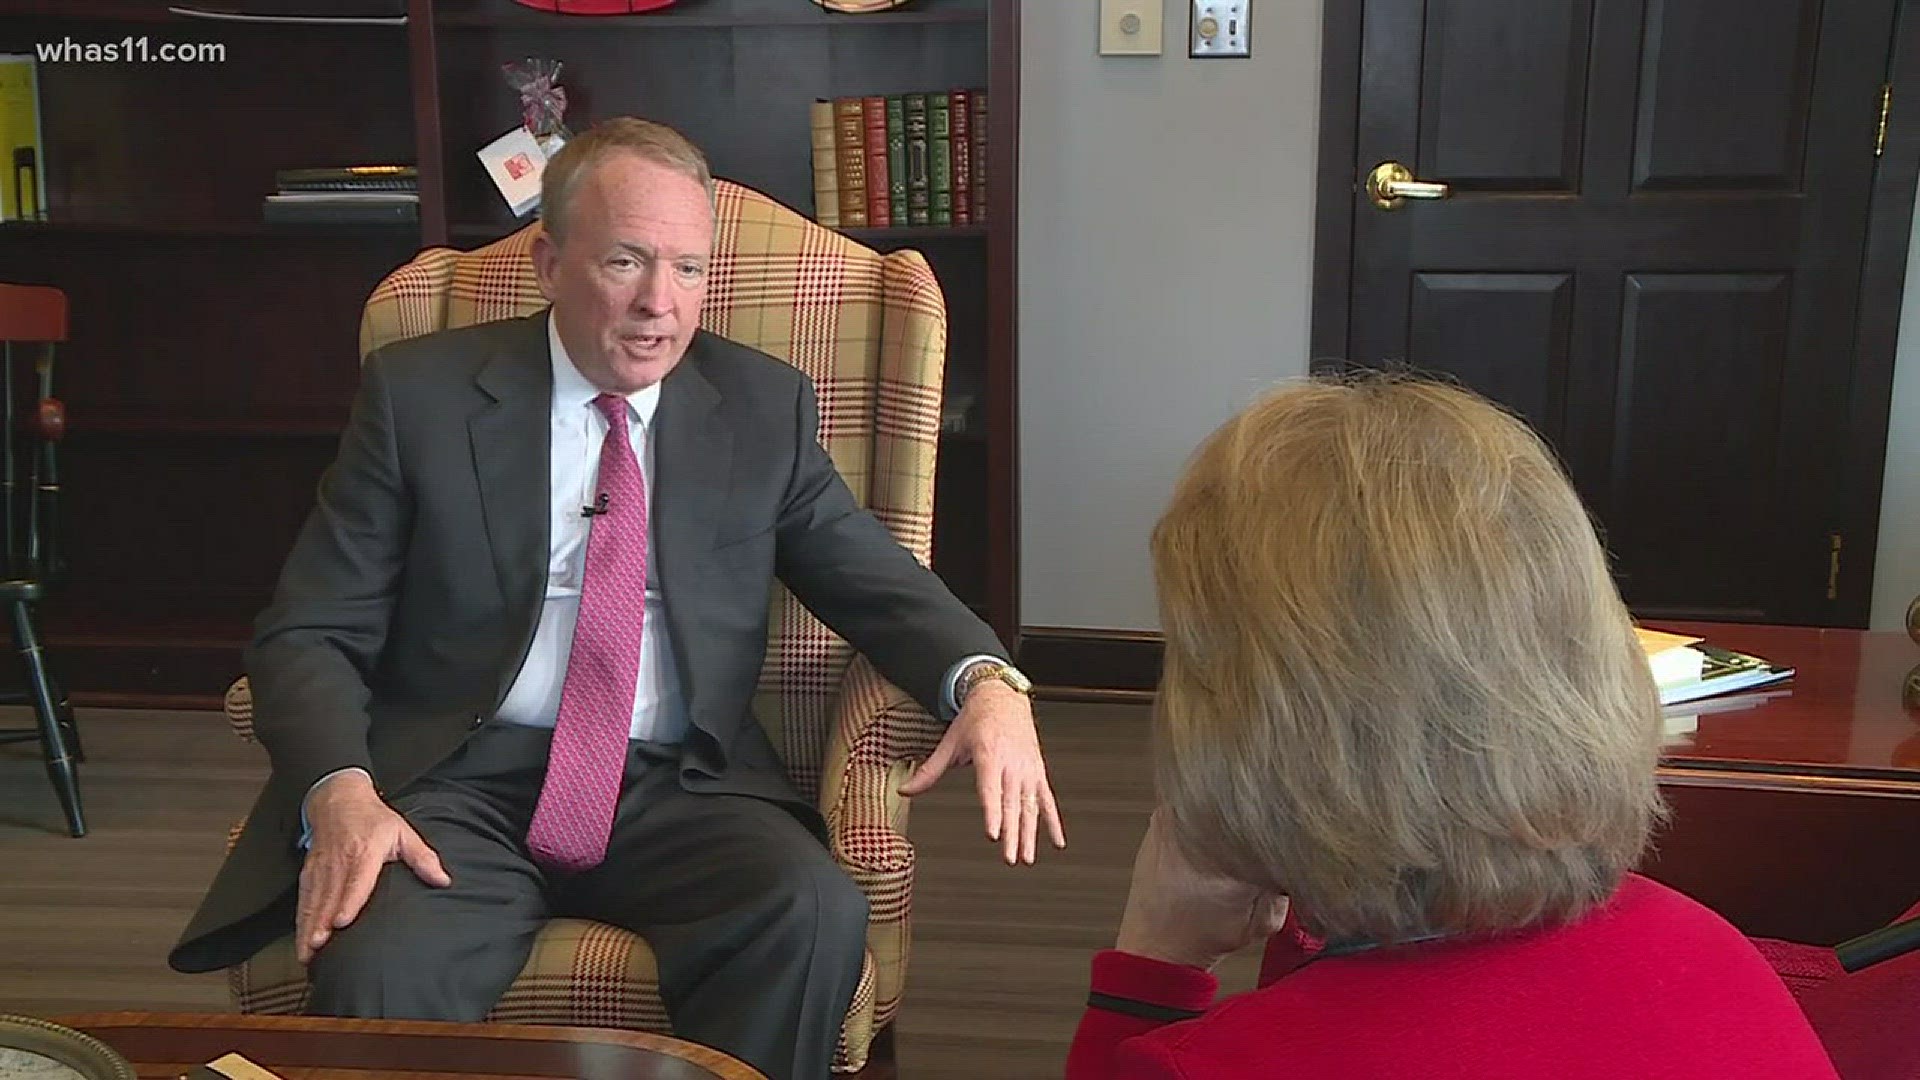 One-one-one interview with Dr. Postel about his time at UofL